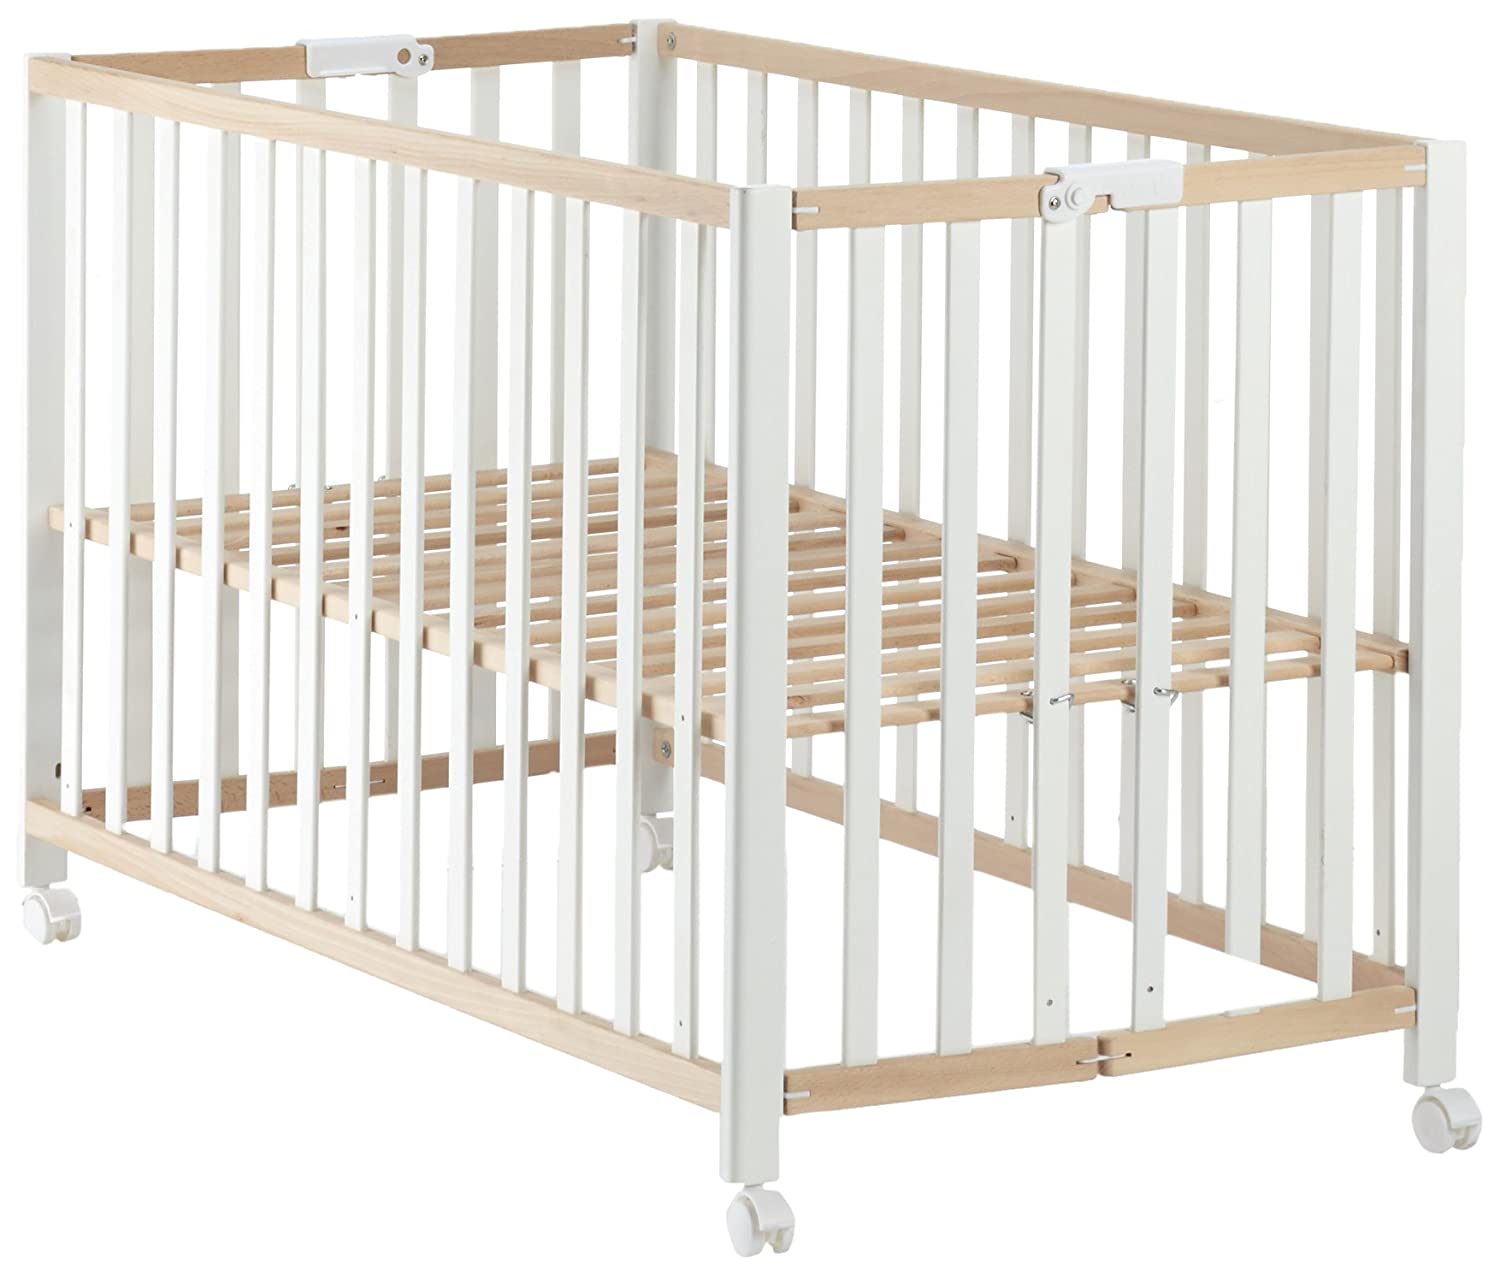 roba Folding Bed \'Fold Up\' Baby Bed 60 x 120 cm Organic Beech Natural / White Cot 3-Position Height Adjustable Space-Saving Cot with Wheels for Folding